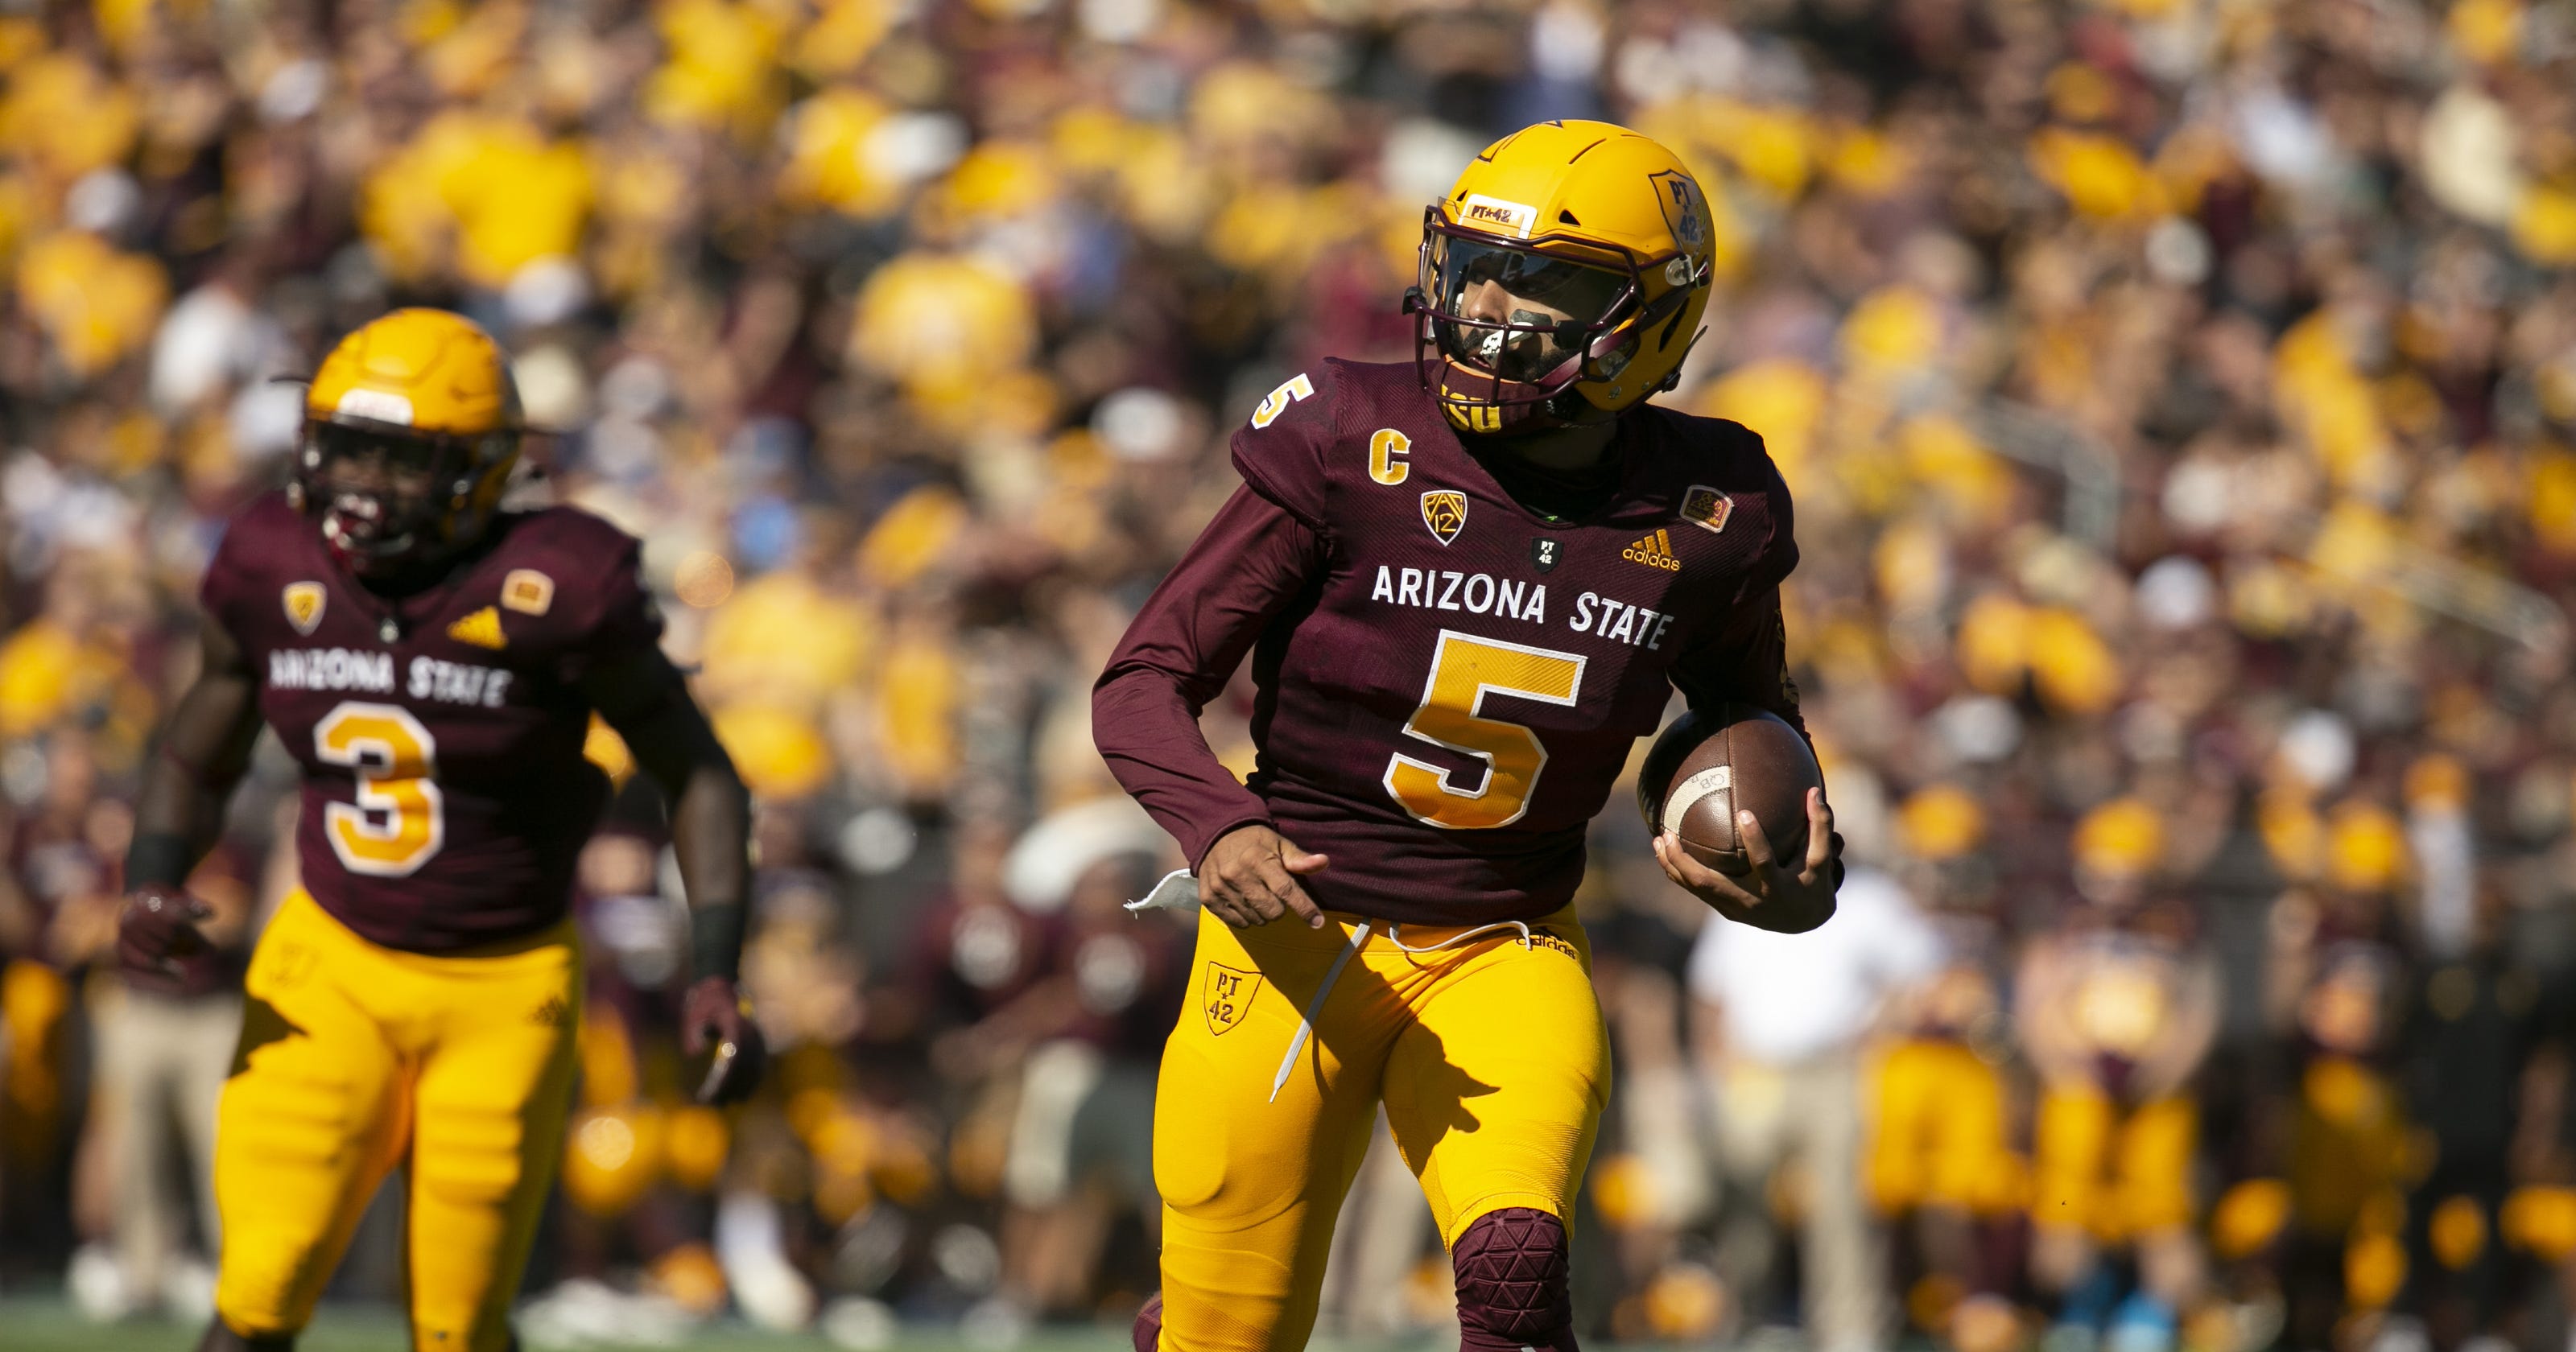 ASU 2018 football schedule and results